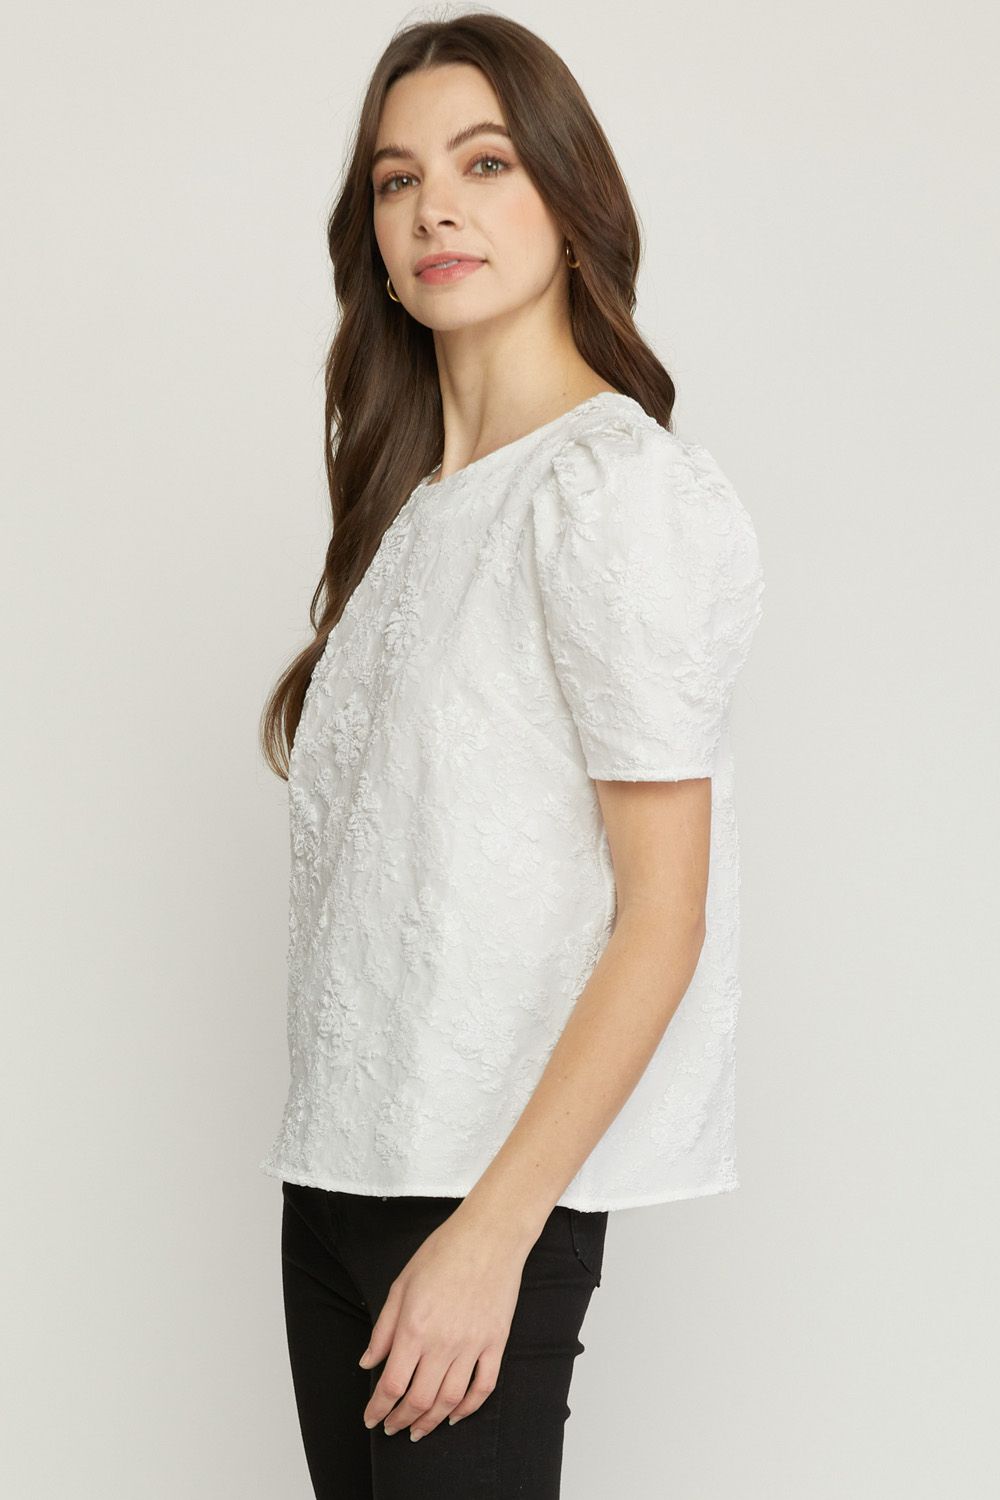 Floral Print Jacquard Puff Sleeve Top by Entro Clothing